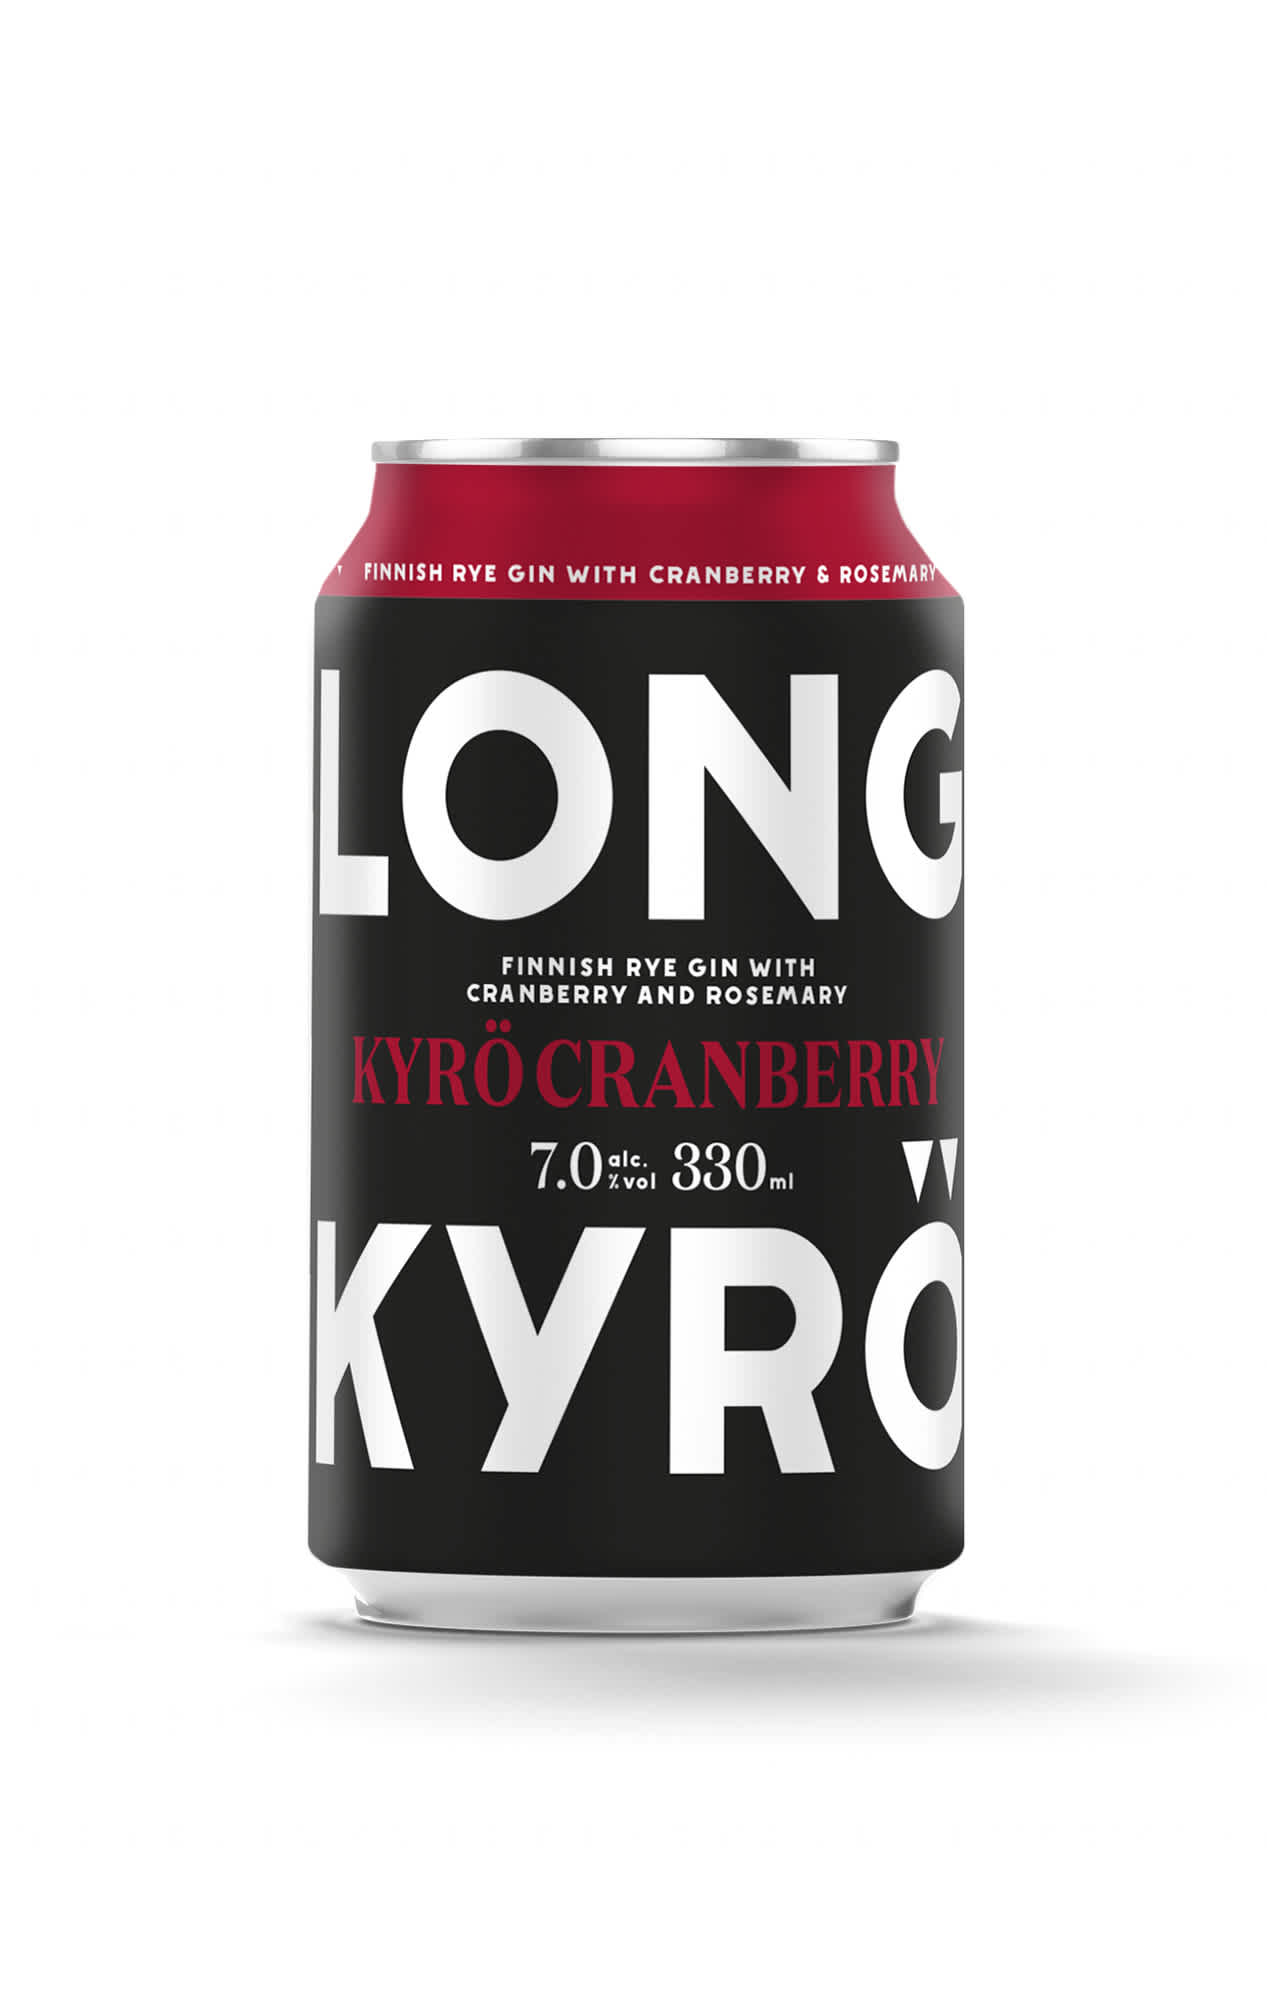 Kyrö Strong Longdrink in a can.